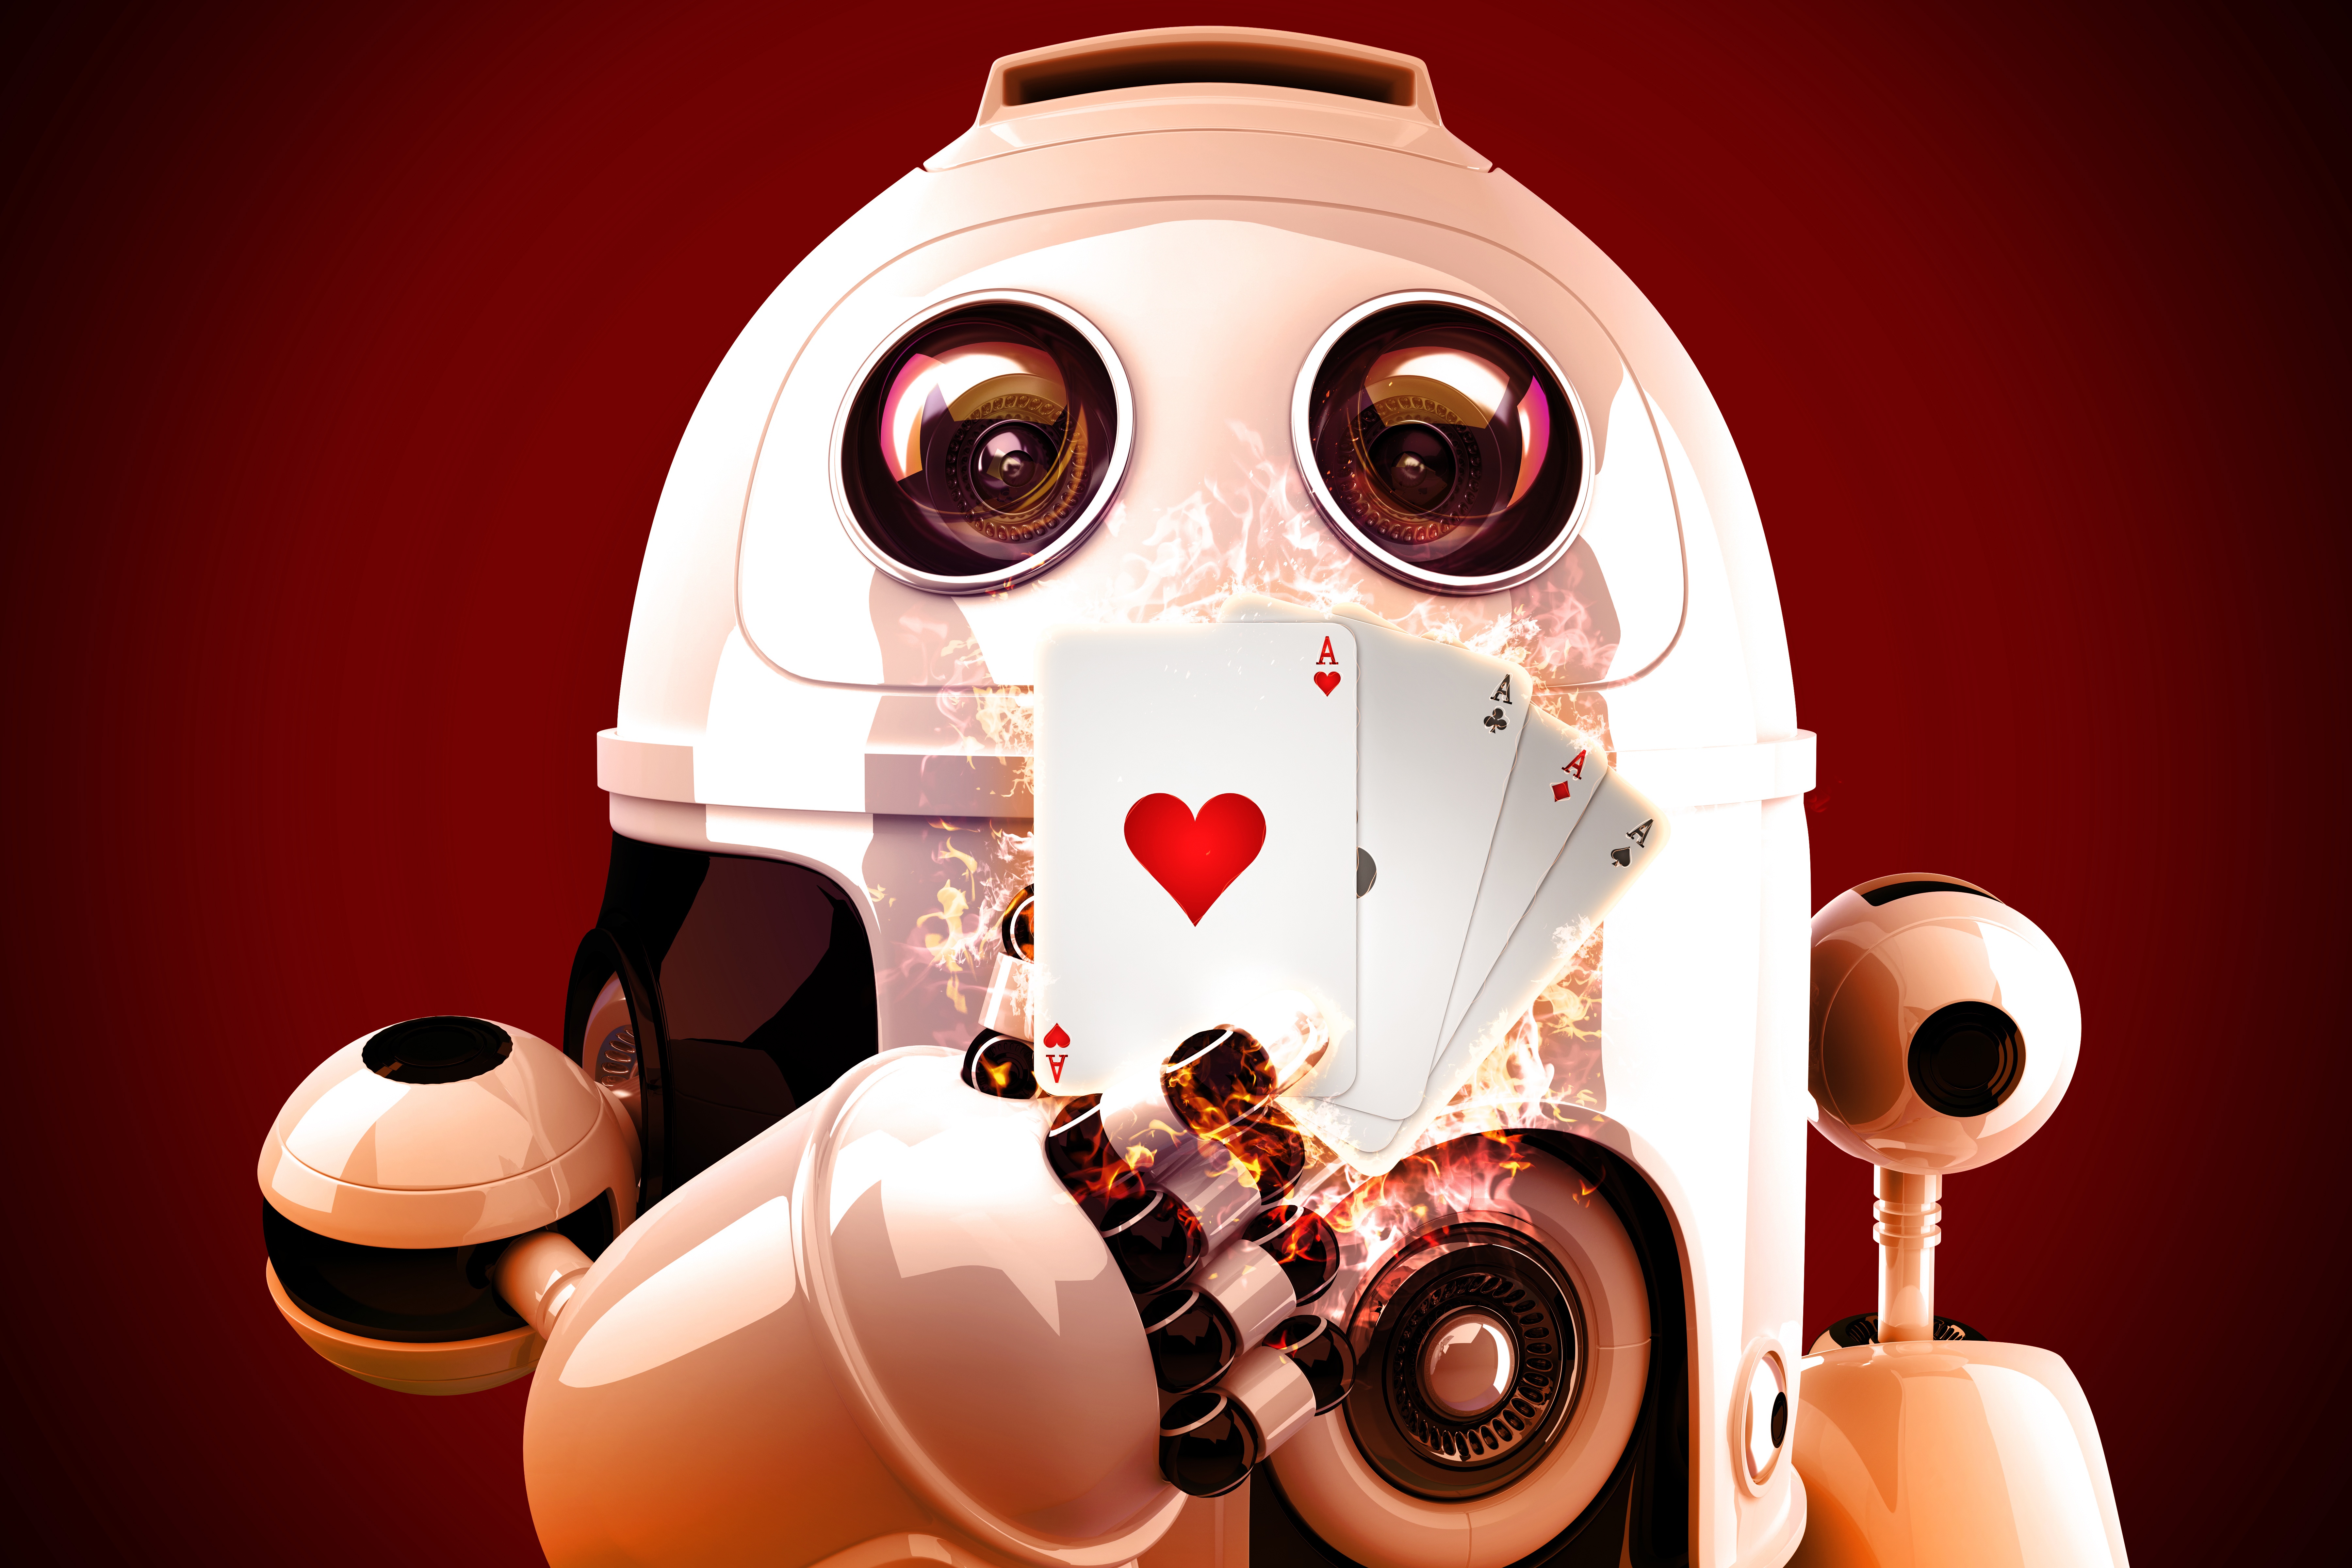 Poker Bots: Are They Smarter Than You?